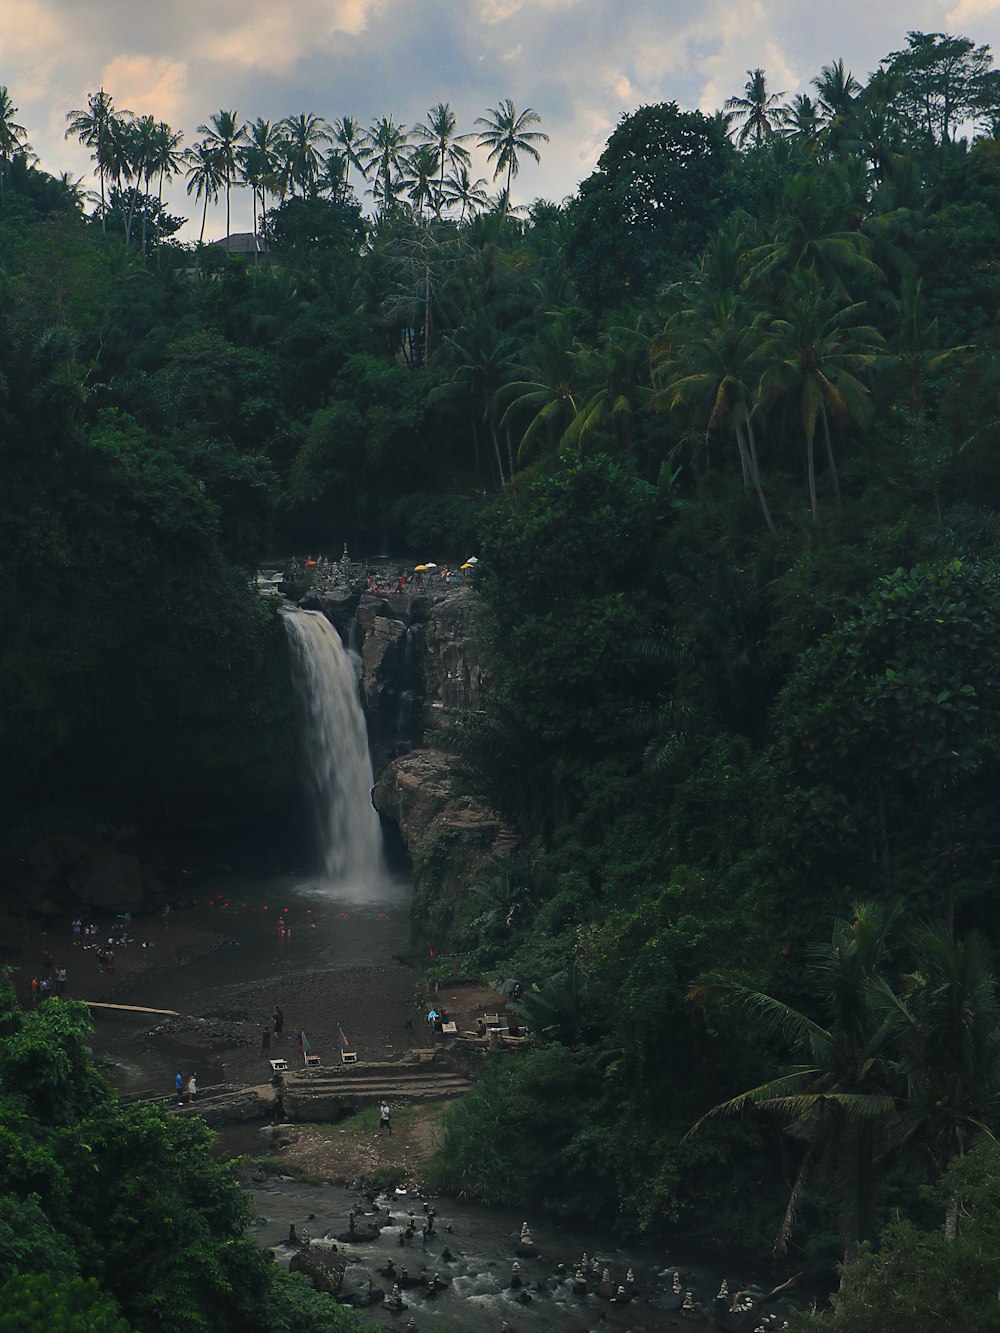 waterfalls surrounded by trees